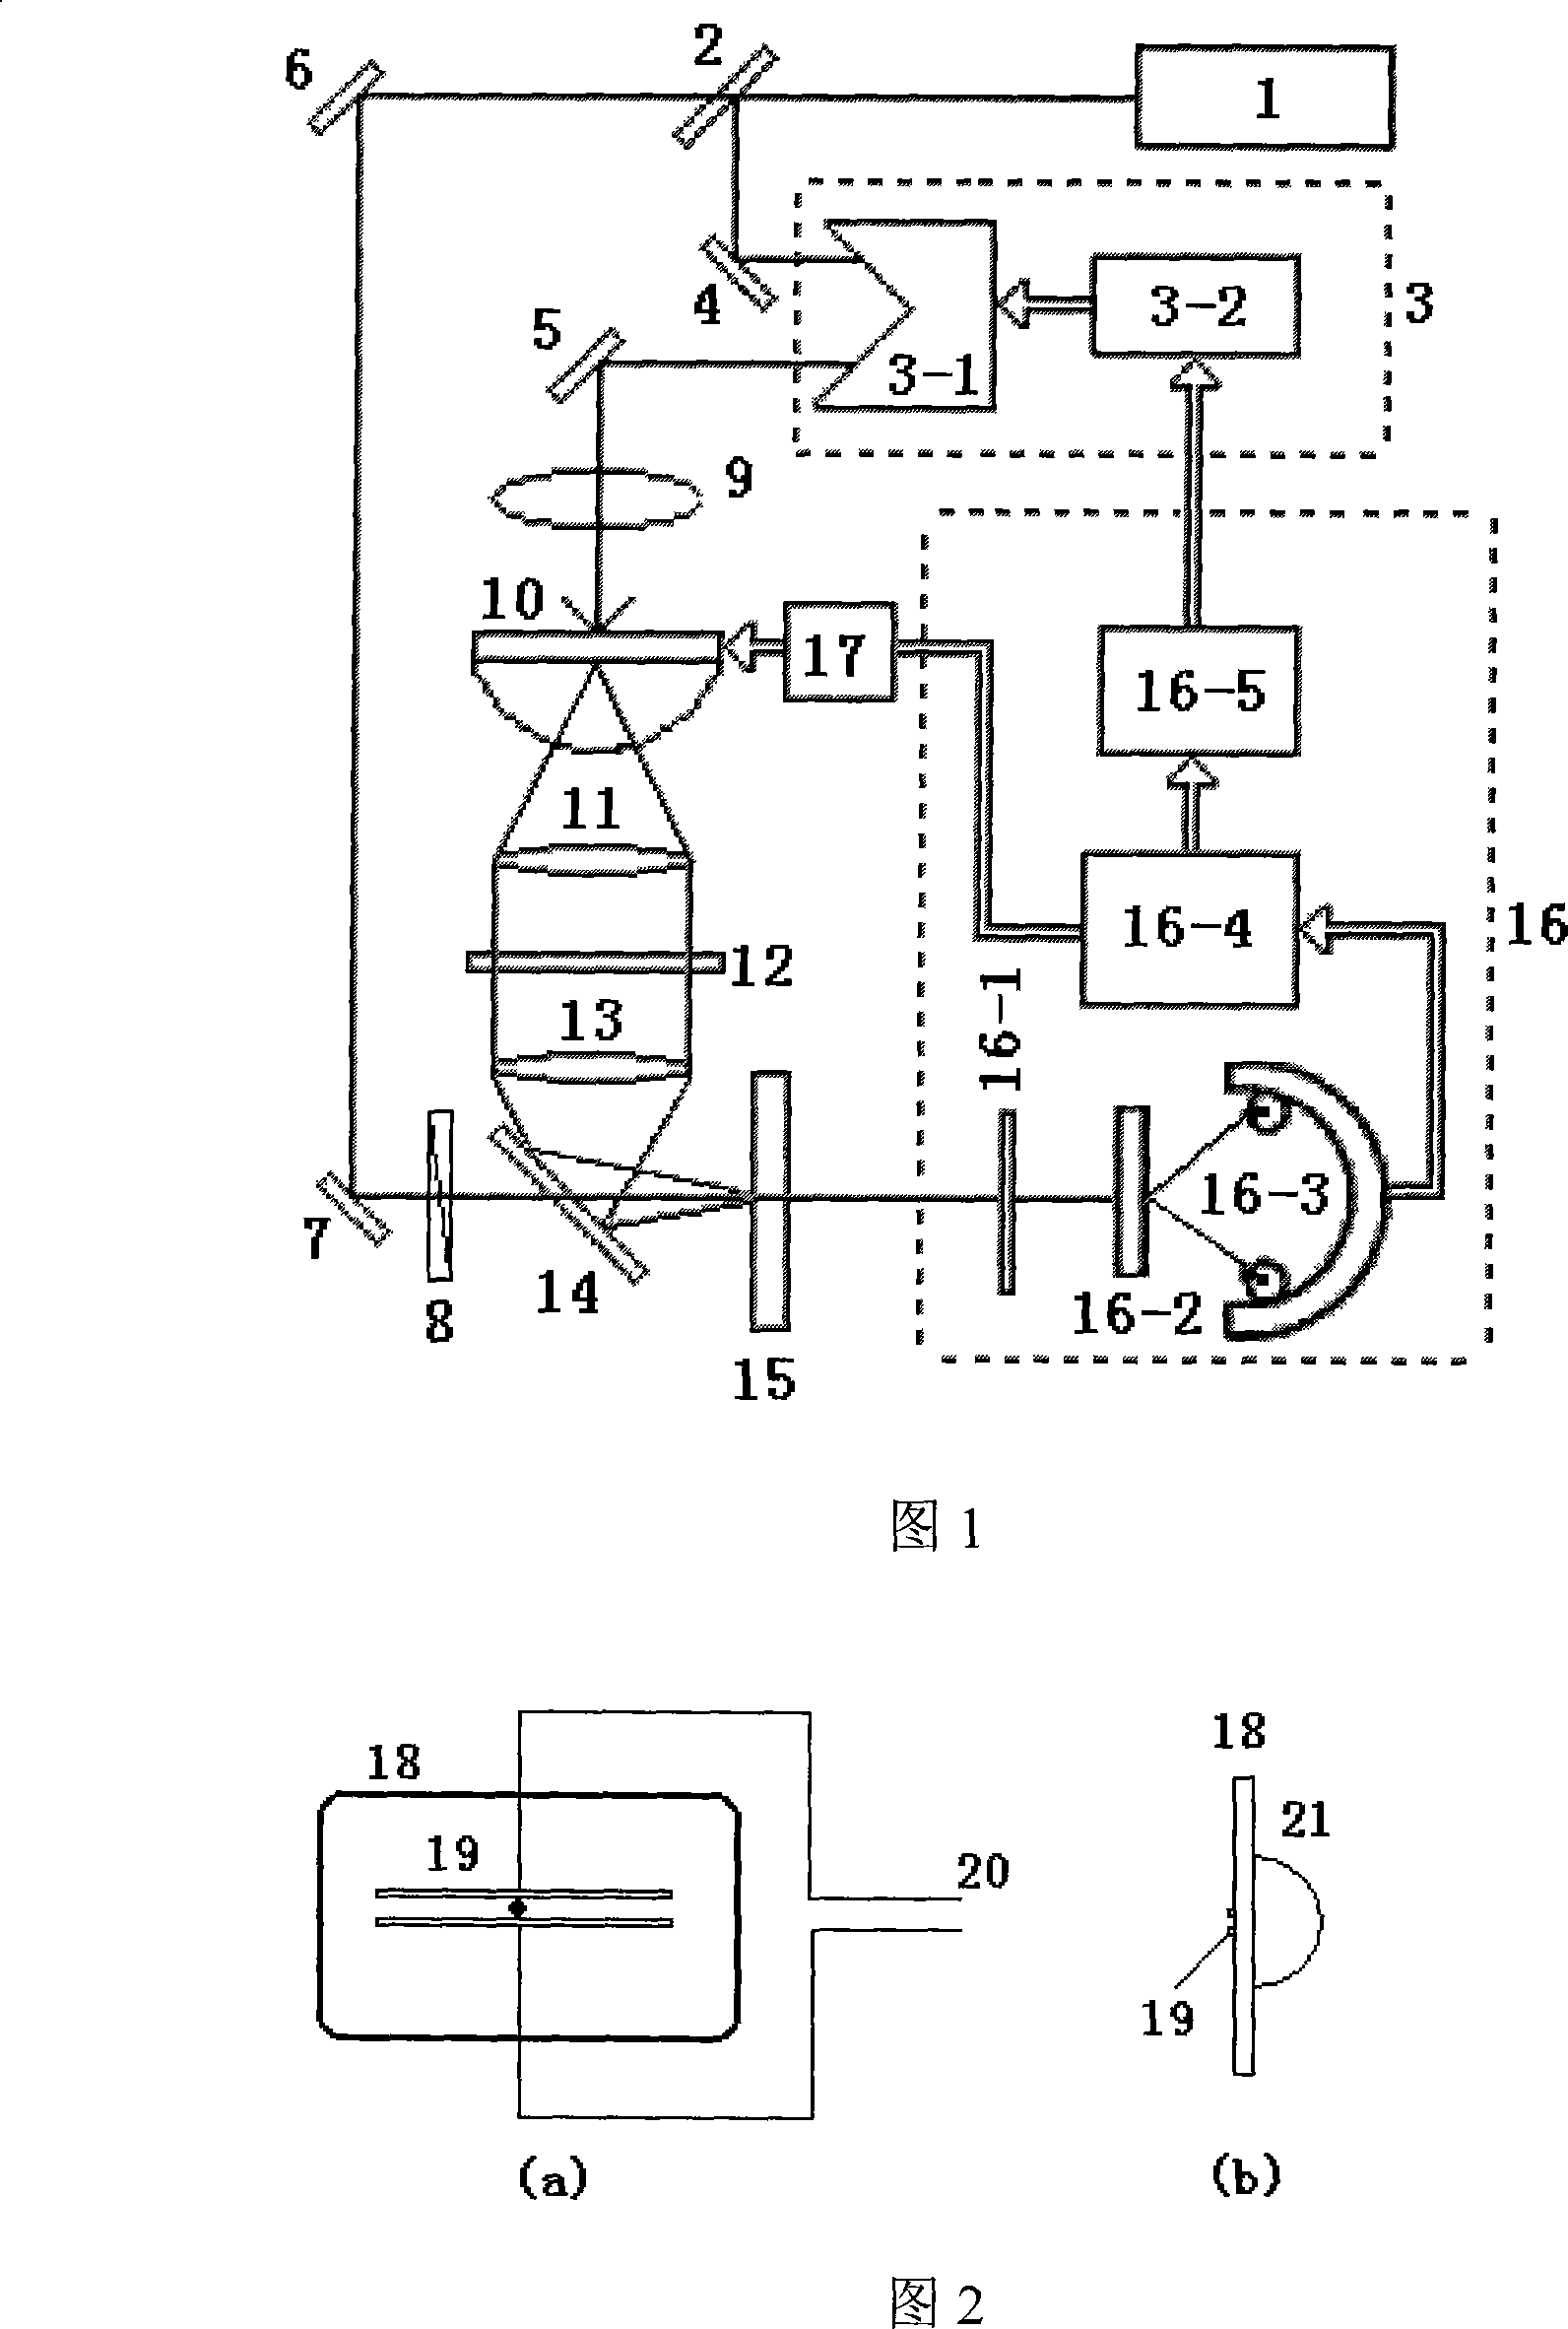 Page quantitative determination device and methods based on terahertz time-domain spectroscopic technology